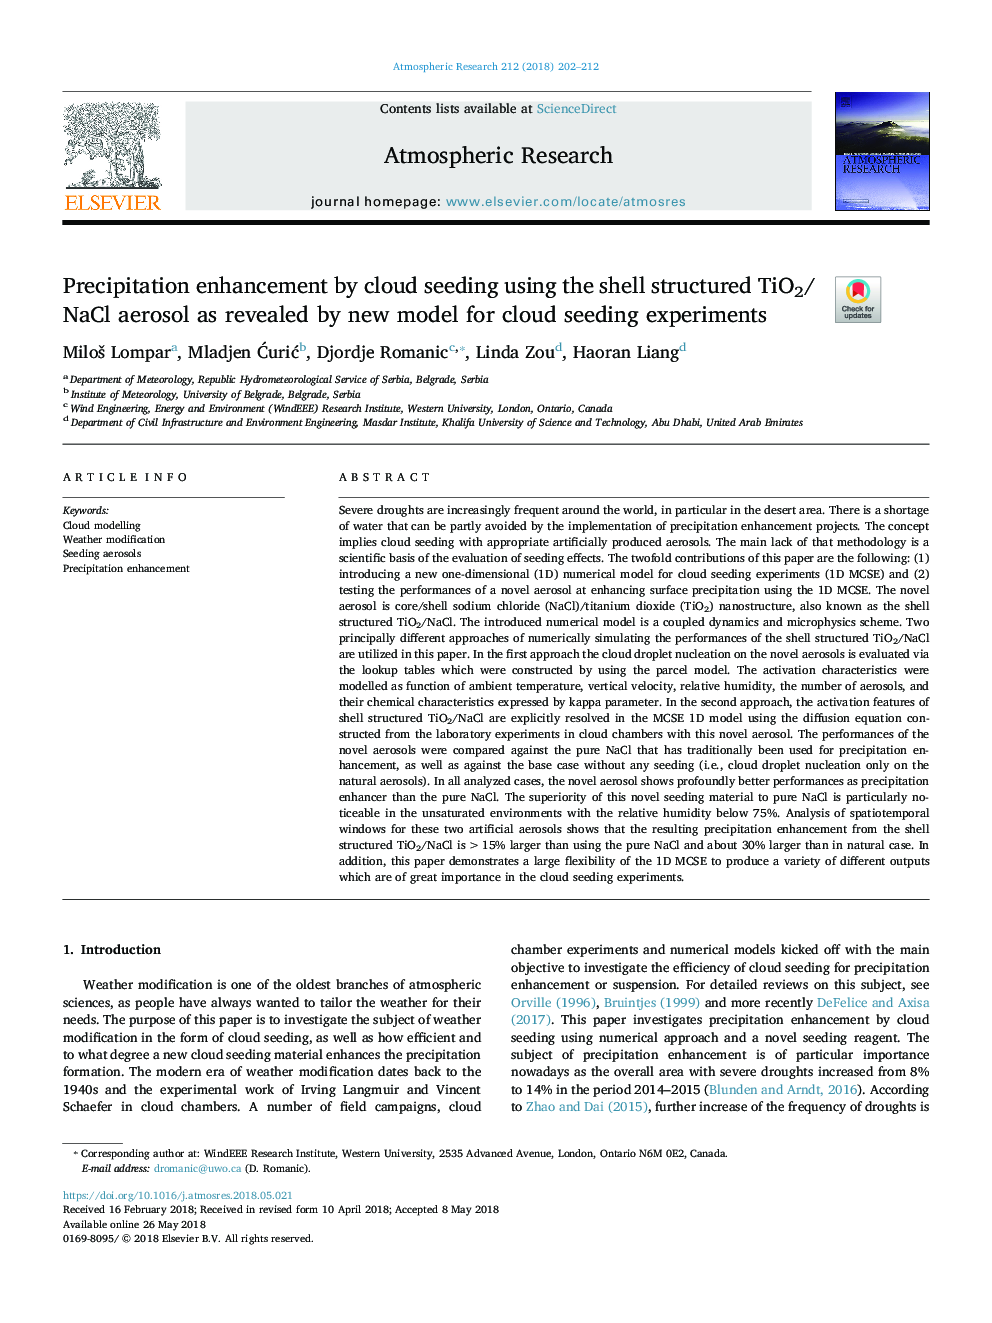 Precipitation enhancement by cloud seeding using the shell structured TiO2/NaCl aerosol as revealed by new model for cloud seeding experiments